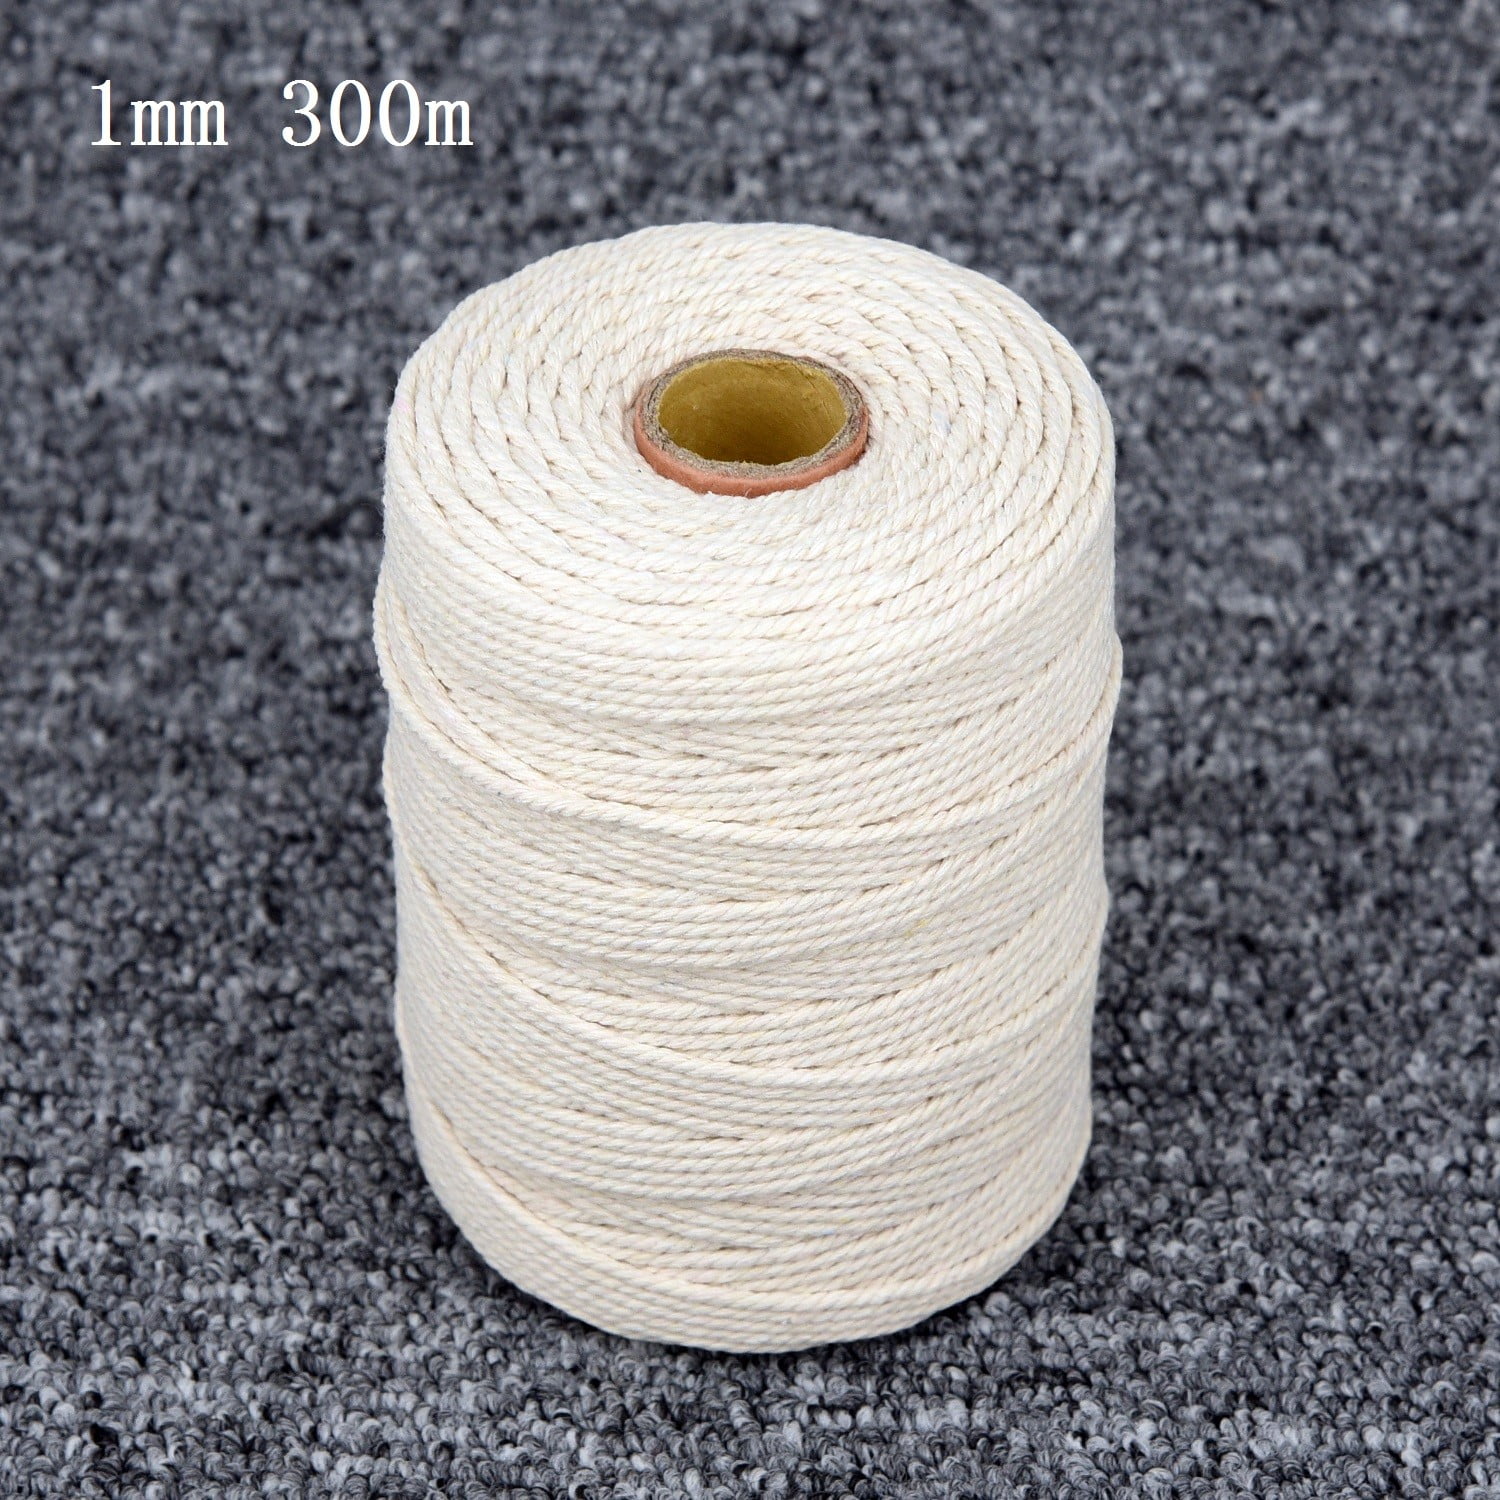 LEREATI Macrame Cord 1mm x 426 Yard Natural Cotton String Twine Macrame  Rope Yarn, Colored String Craft Cord for DIY Jewelry Making Wall Hanging  Gift